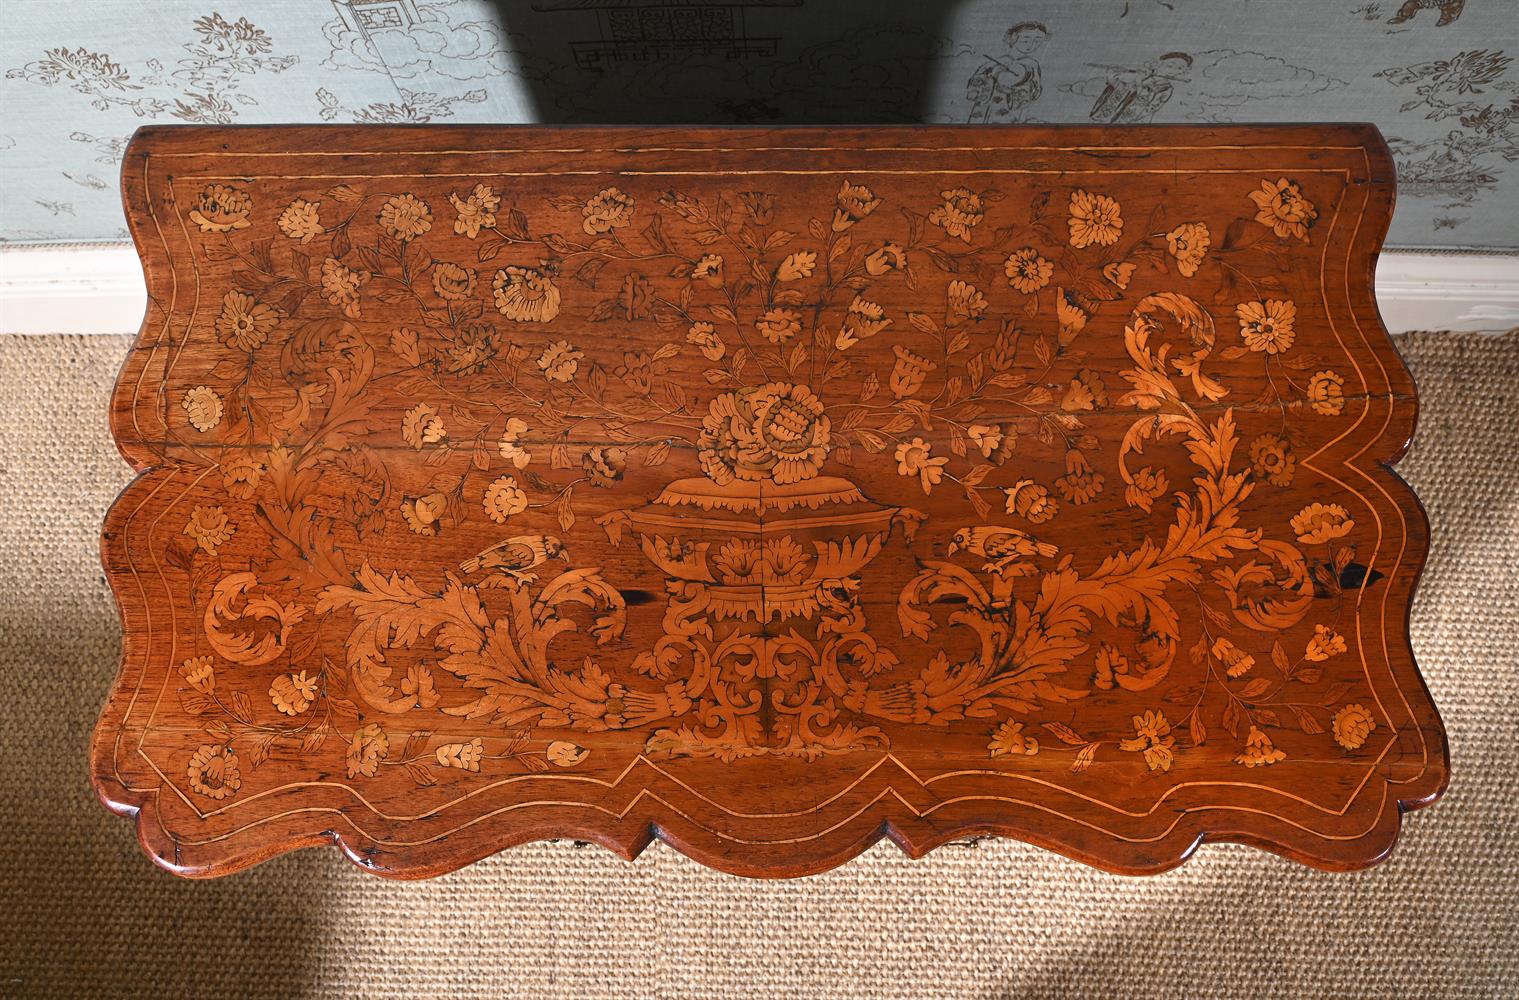 A DUTCH WALNUT AND MARQUETRY COMMODE, EARLY 18TH CENTURY AND LATER - Image 2 of 2